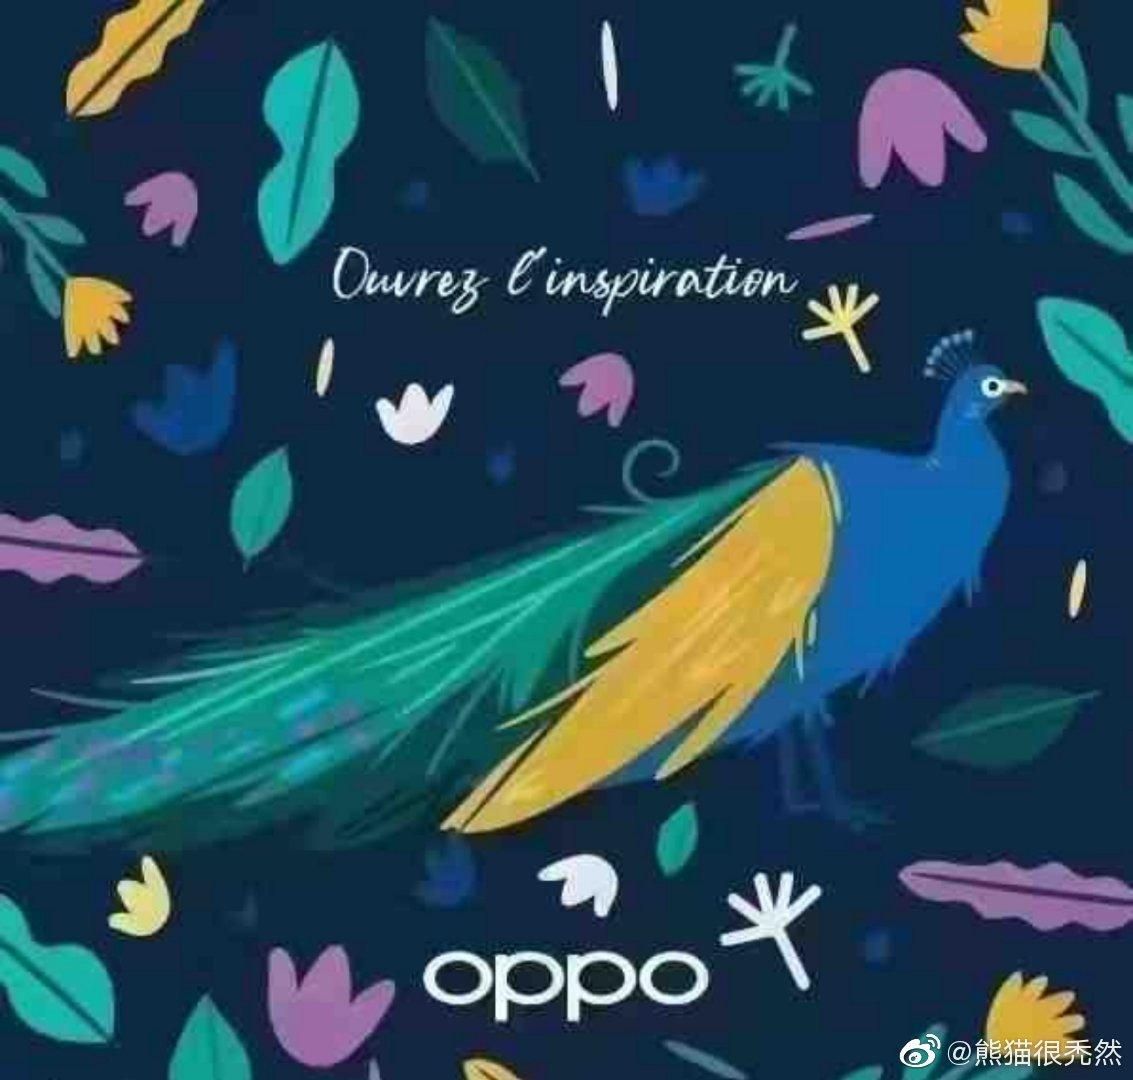 OPPO peacock foldable smartphone